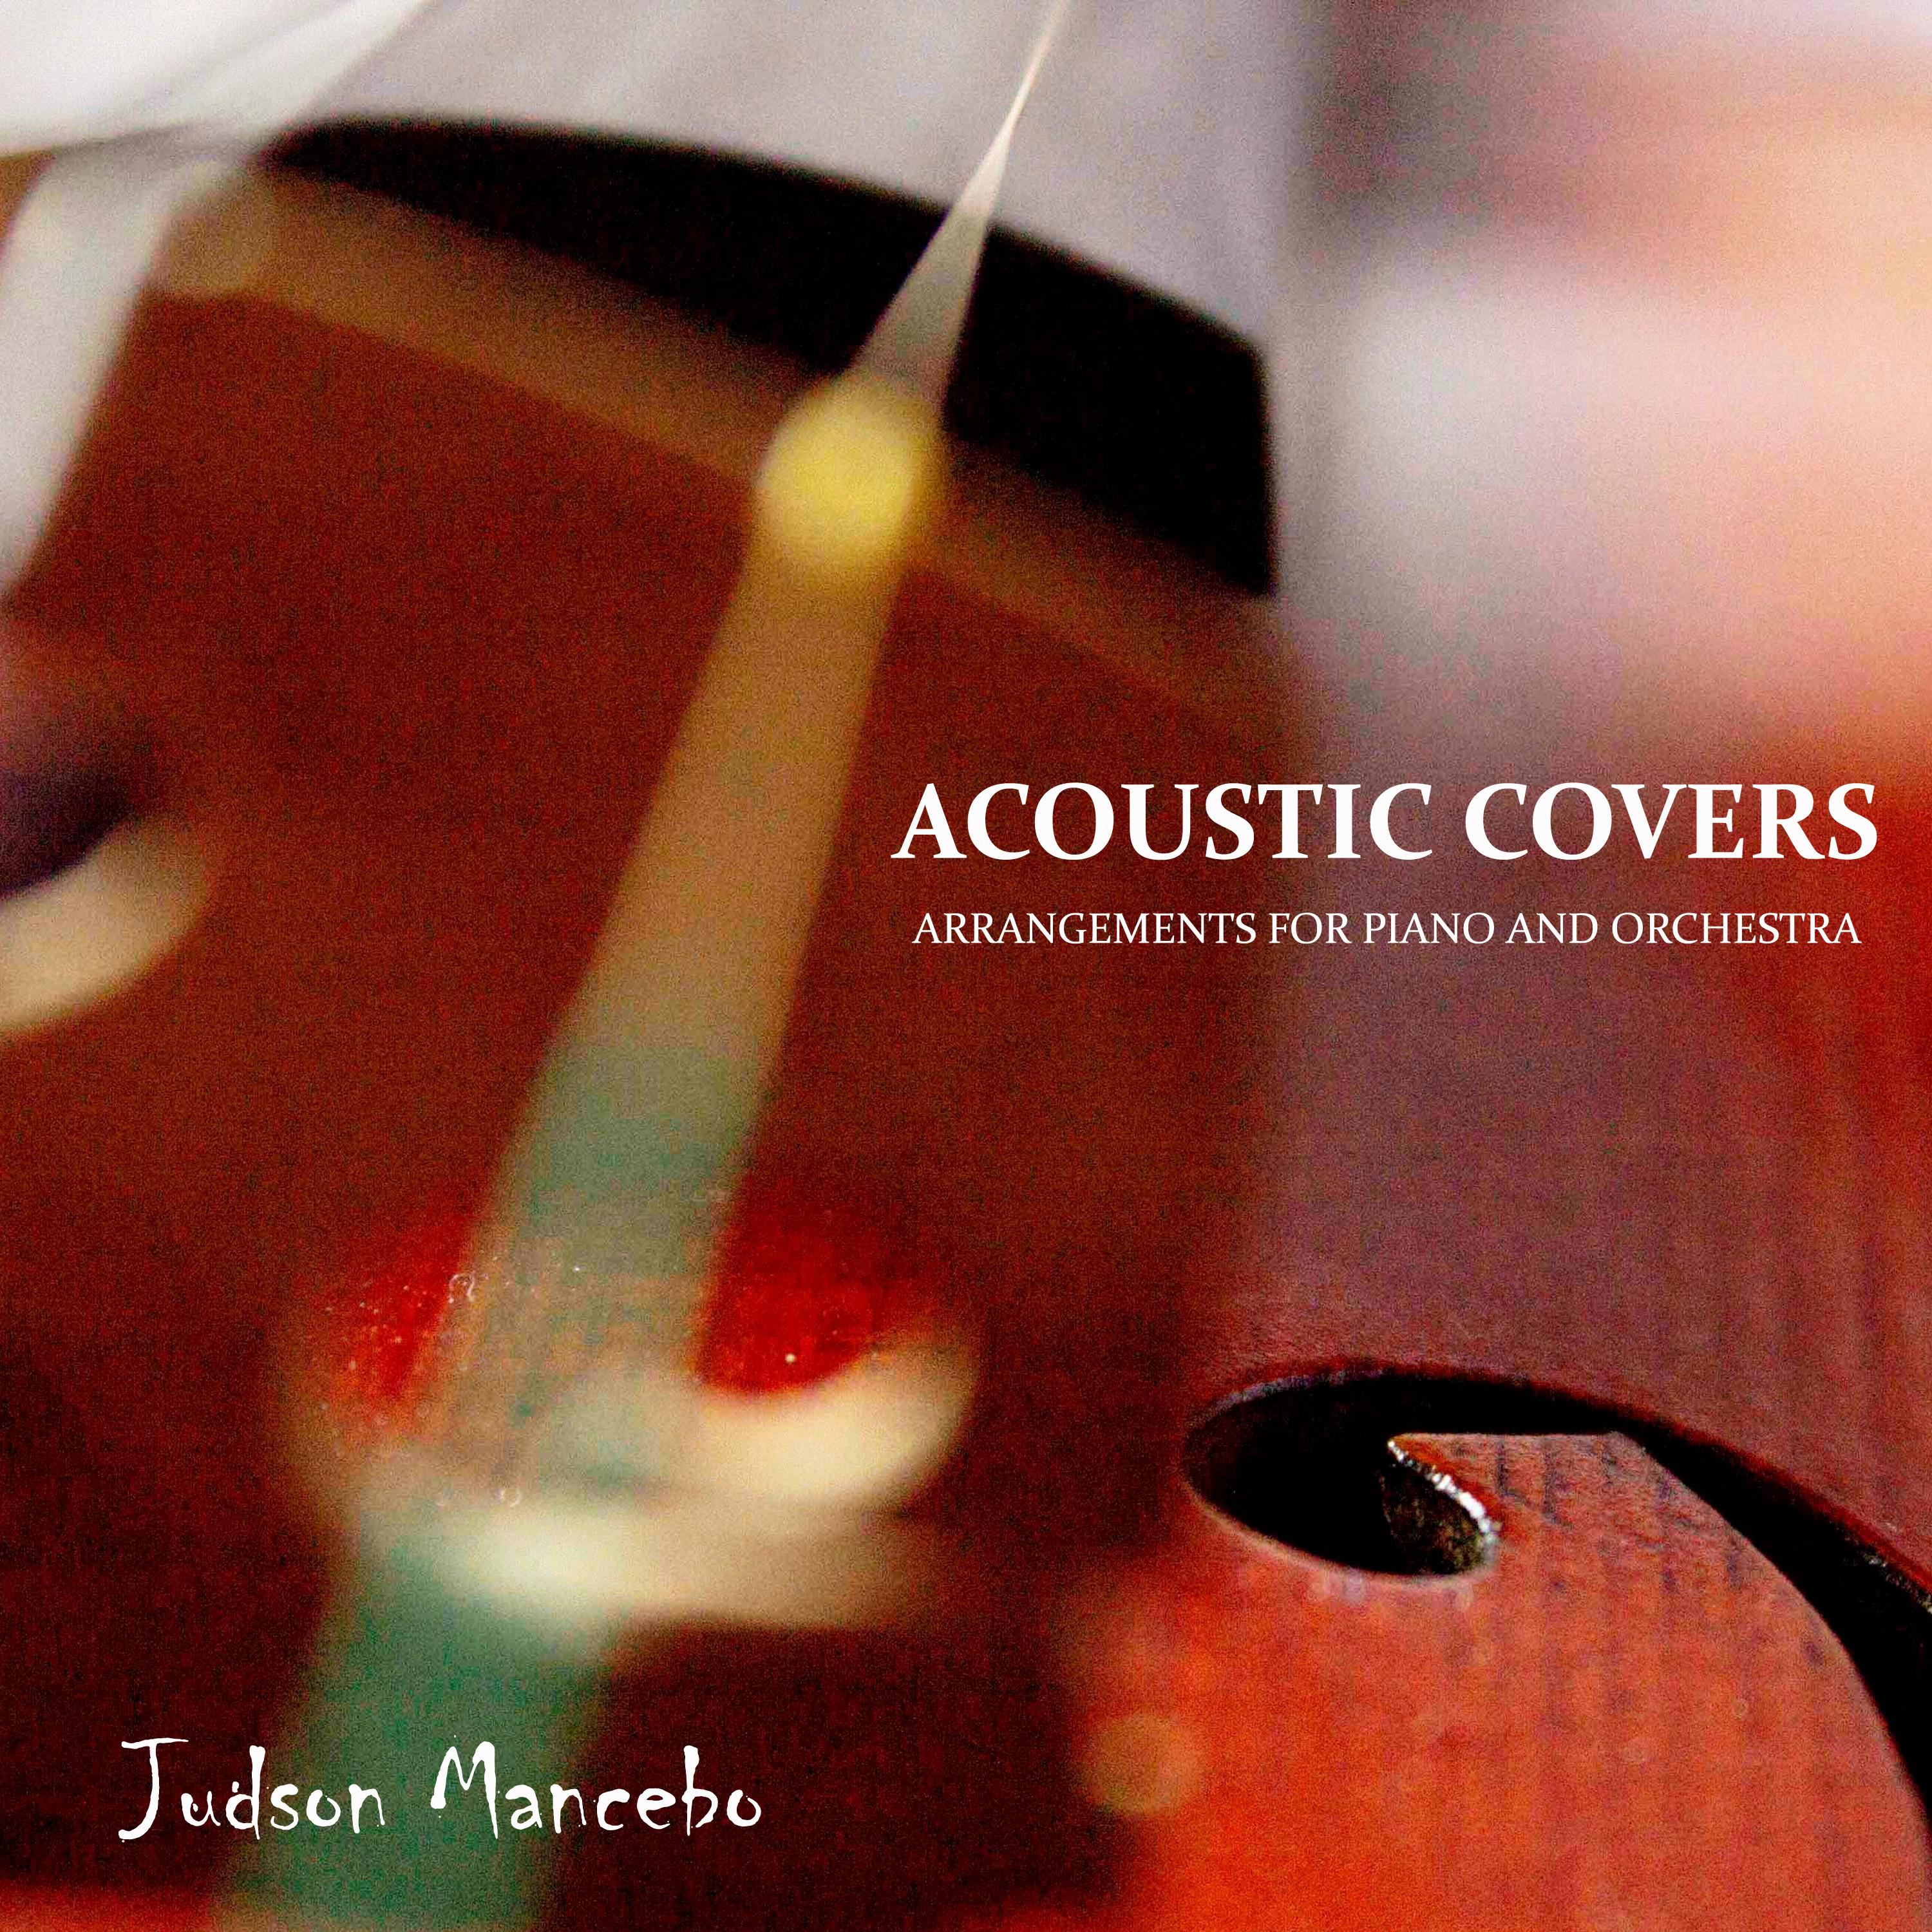 Acoustic Covers: Arrangements for Piano and Orchestra